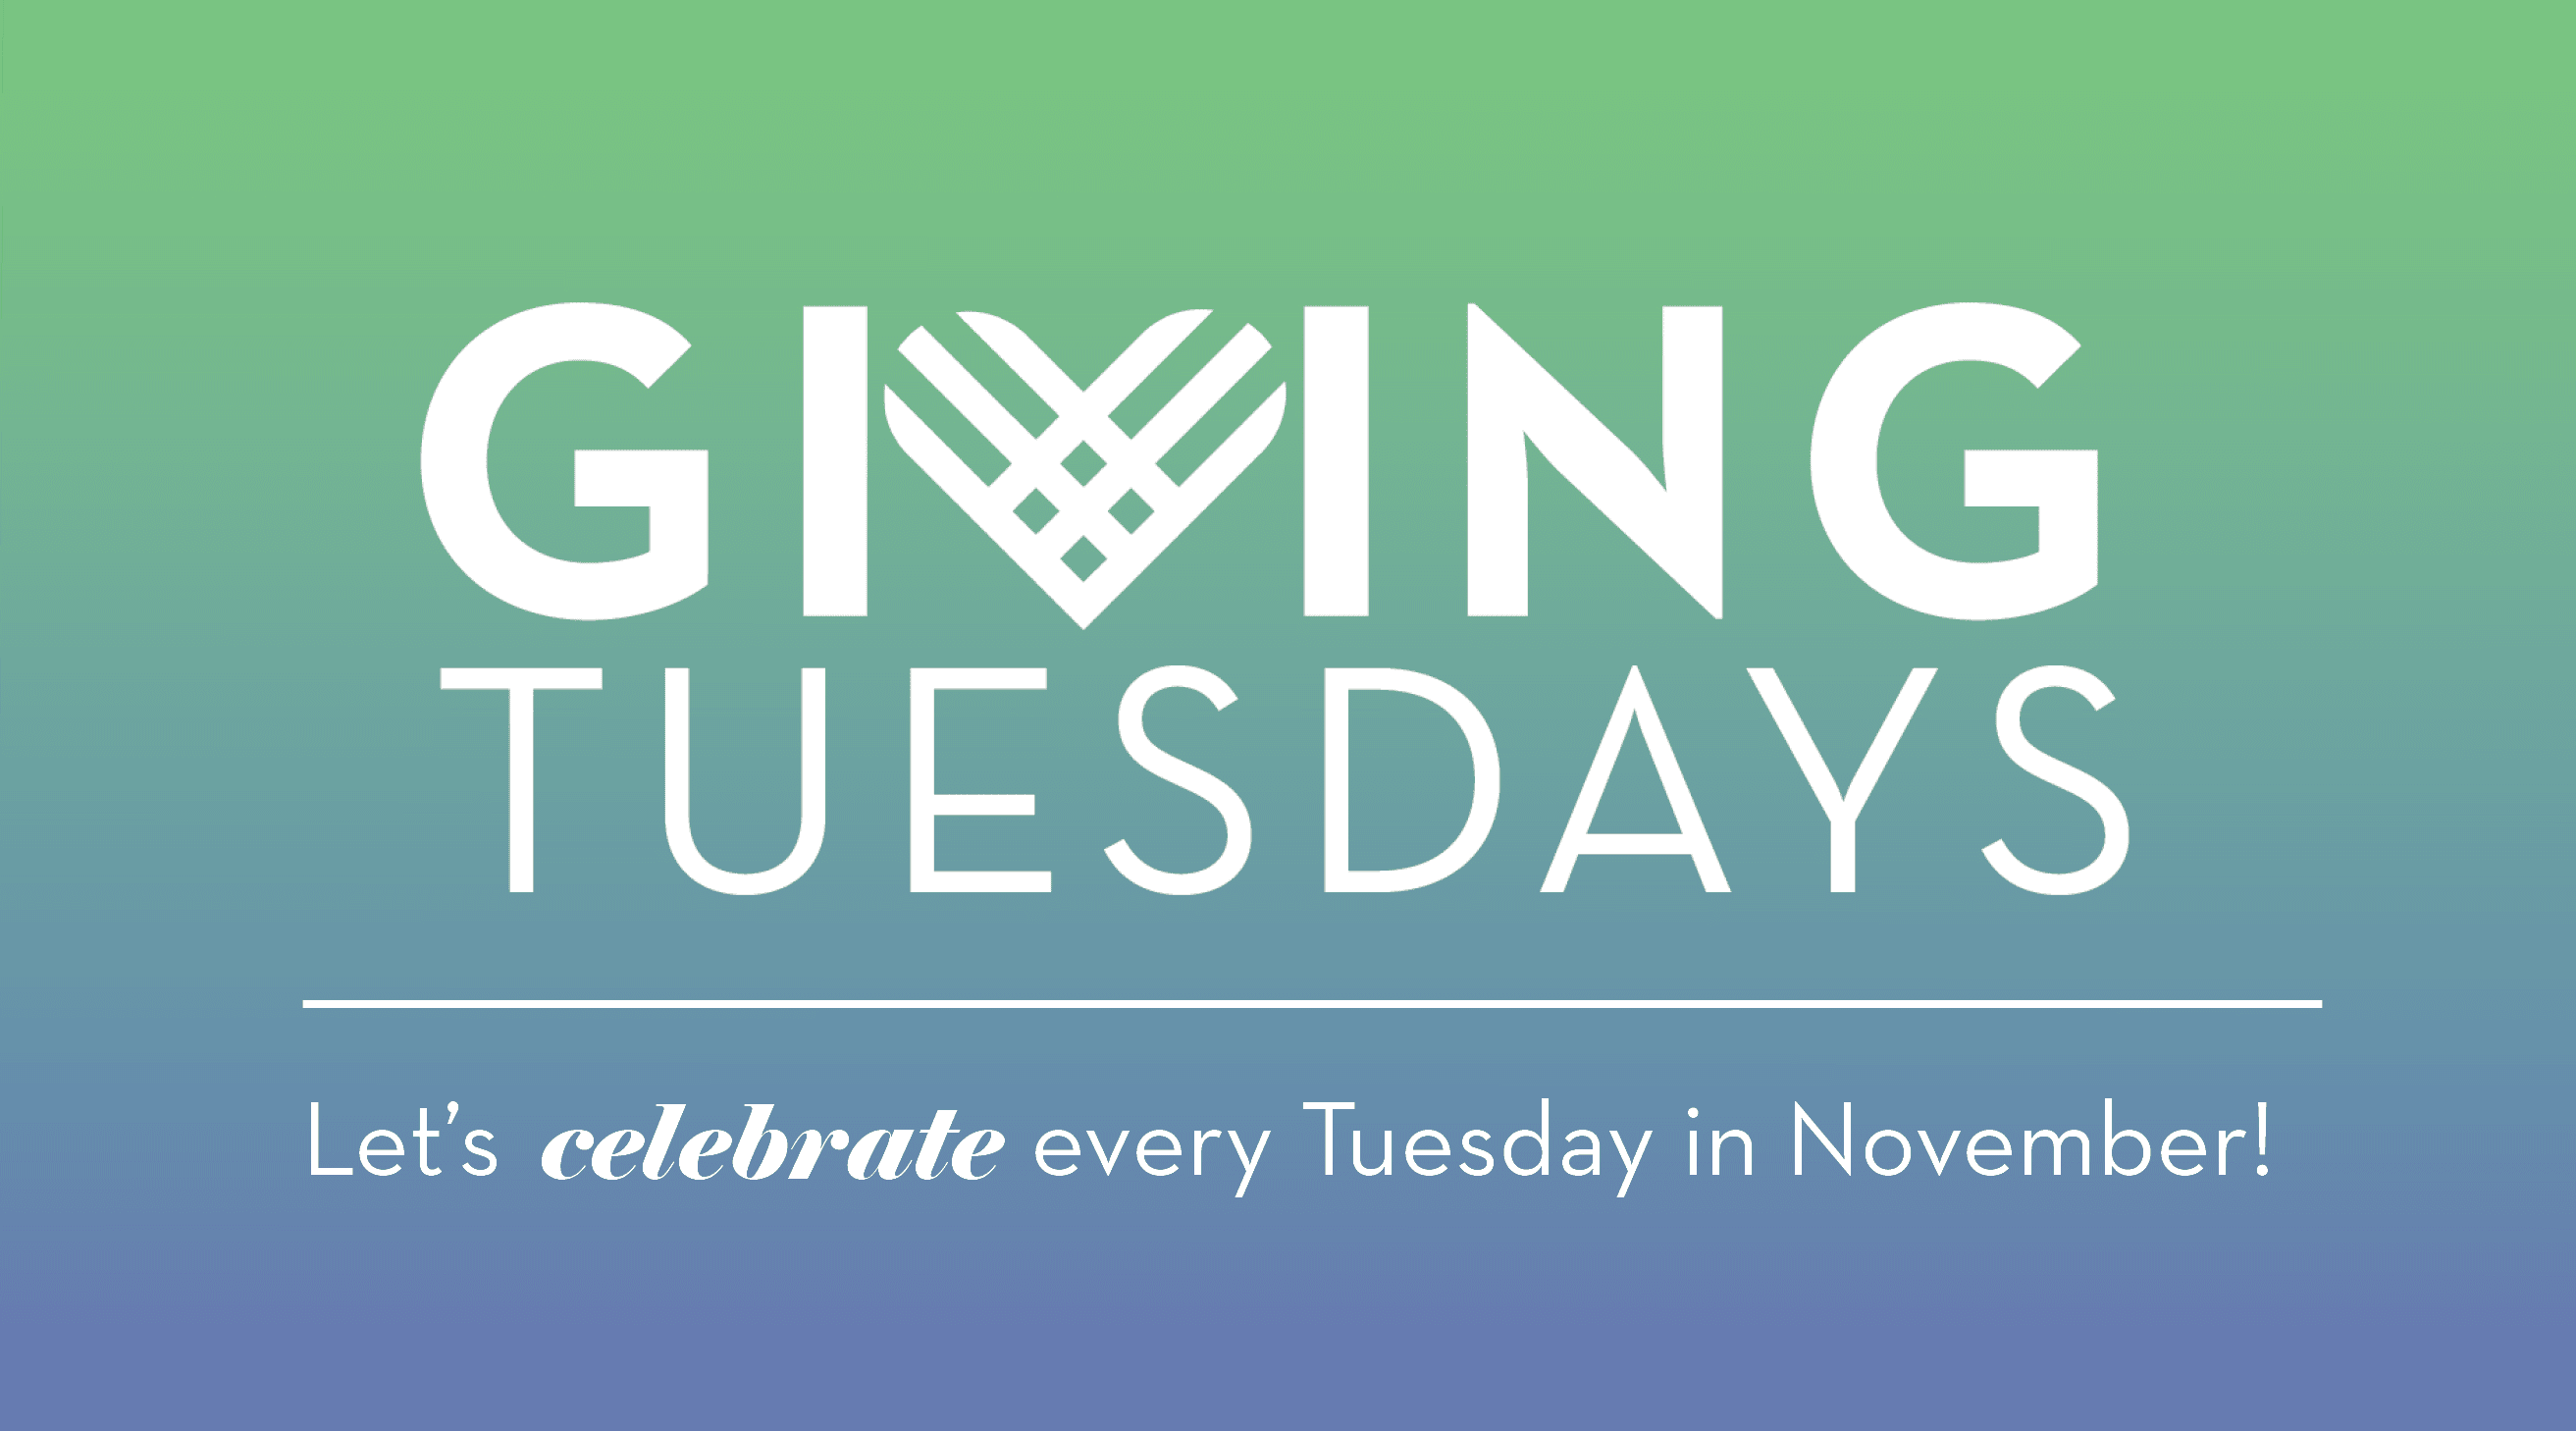 #Giving Tuesdays - Let's celebrate every Tuesday in November!